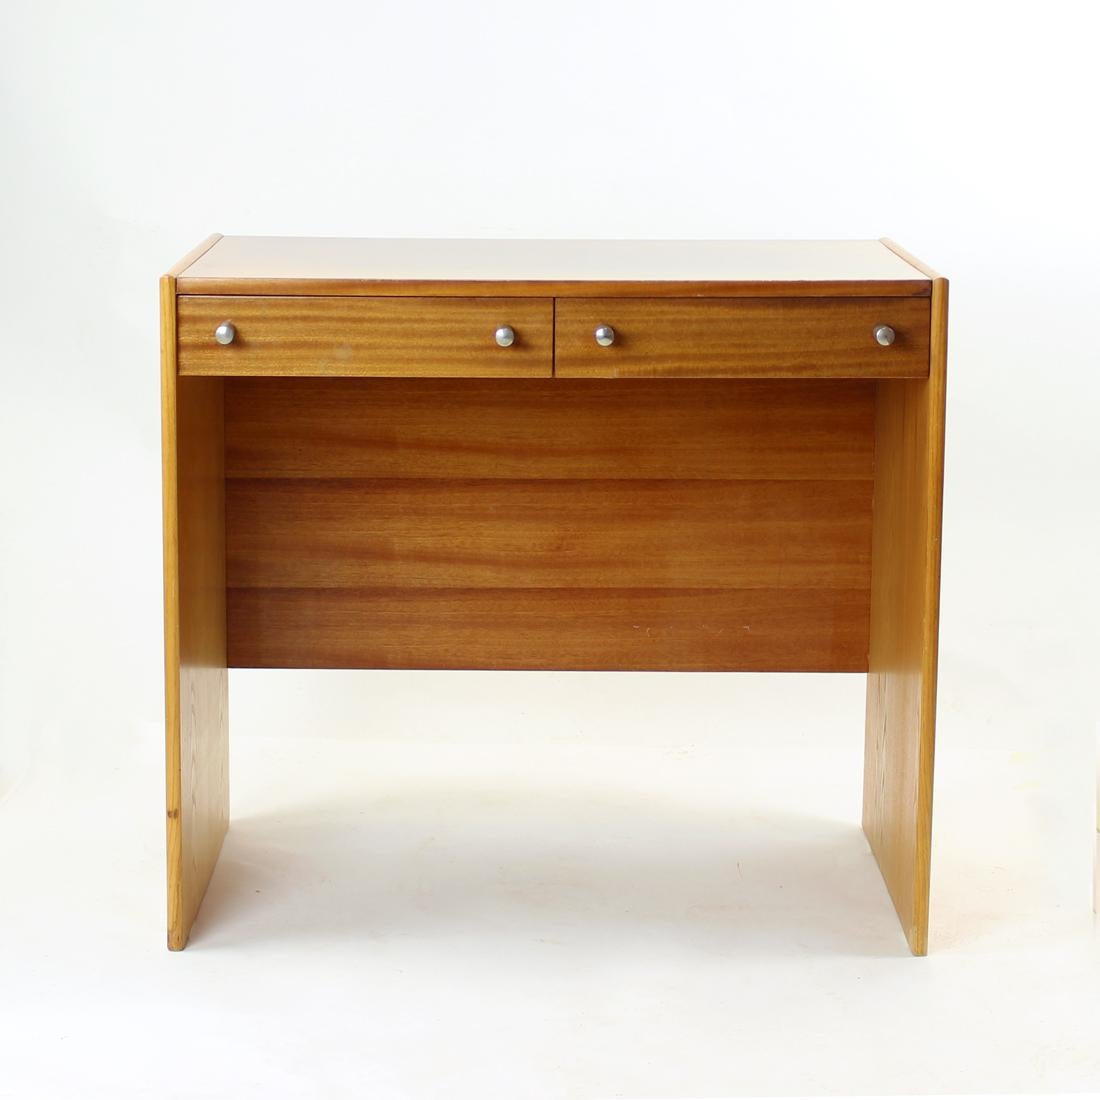 Beautiful midcentury desk, originally used as a desk for a lady, or vanity in the bedroom. The table is elegant combination of lighter birch wood on the sides and mahogany wood on top and faces of the drawers and desk. Beautiful and very strong